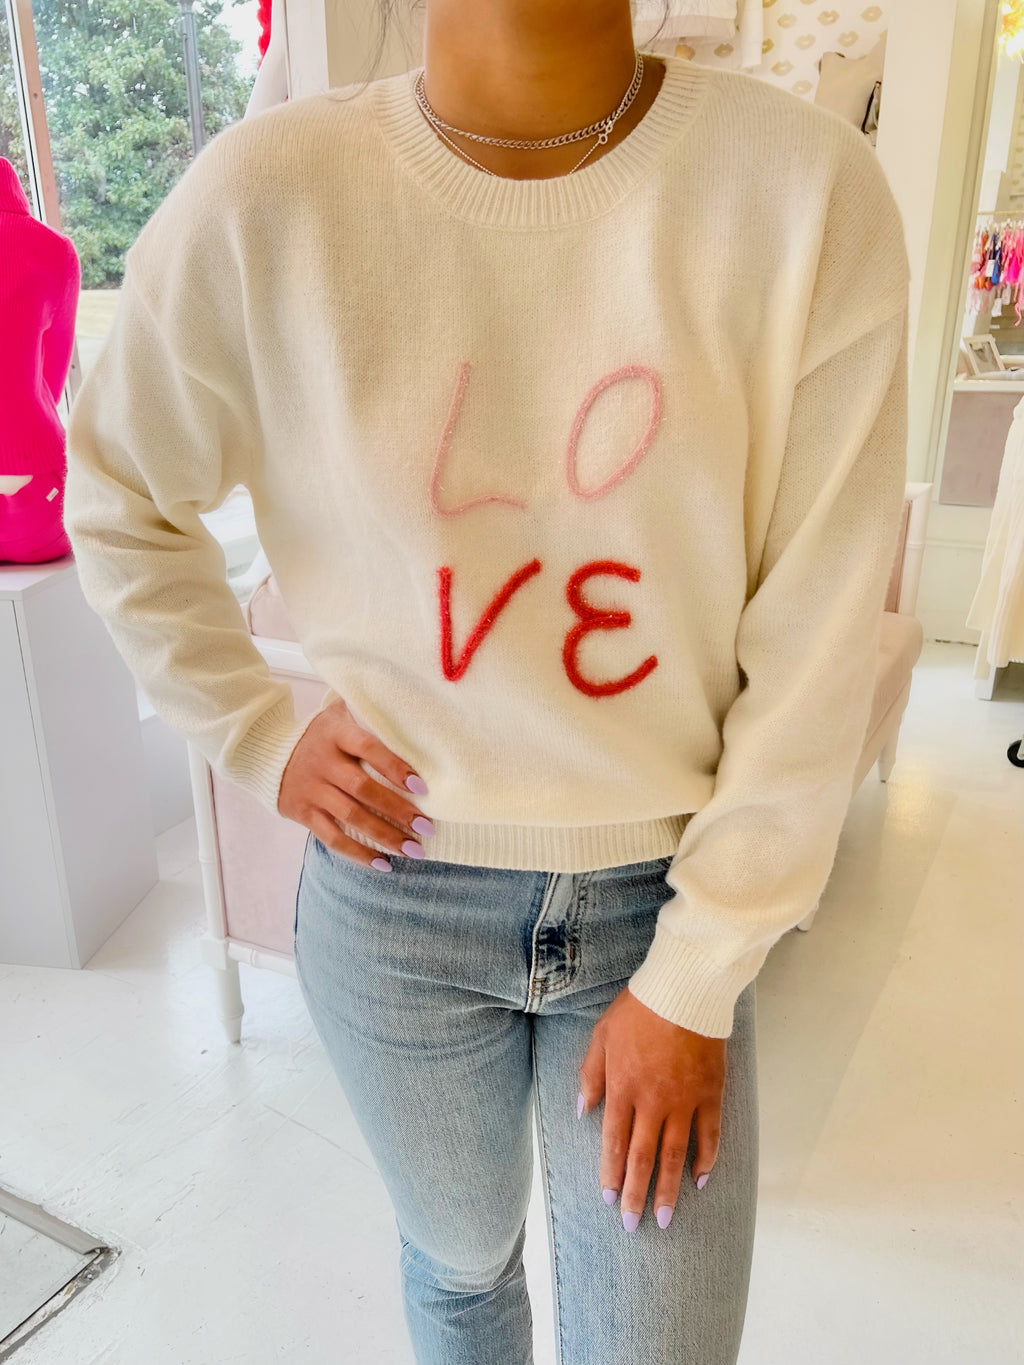 Val "LOVE" Pullover Sweater